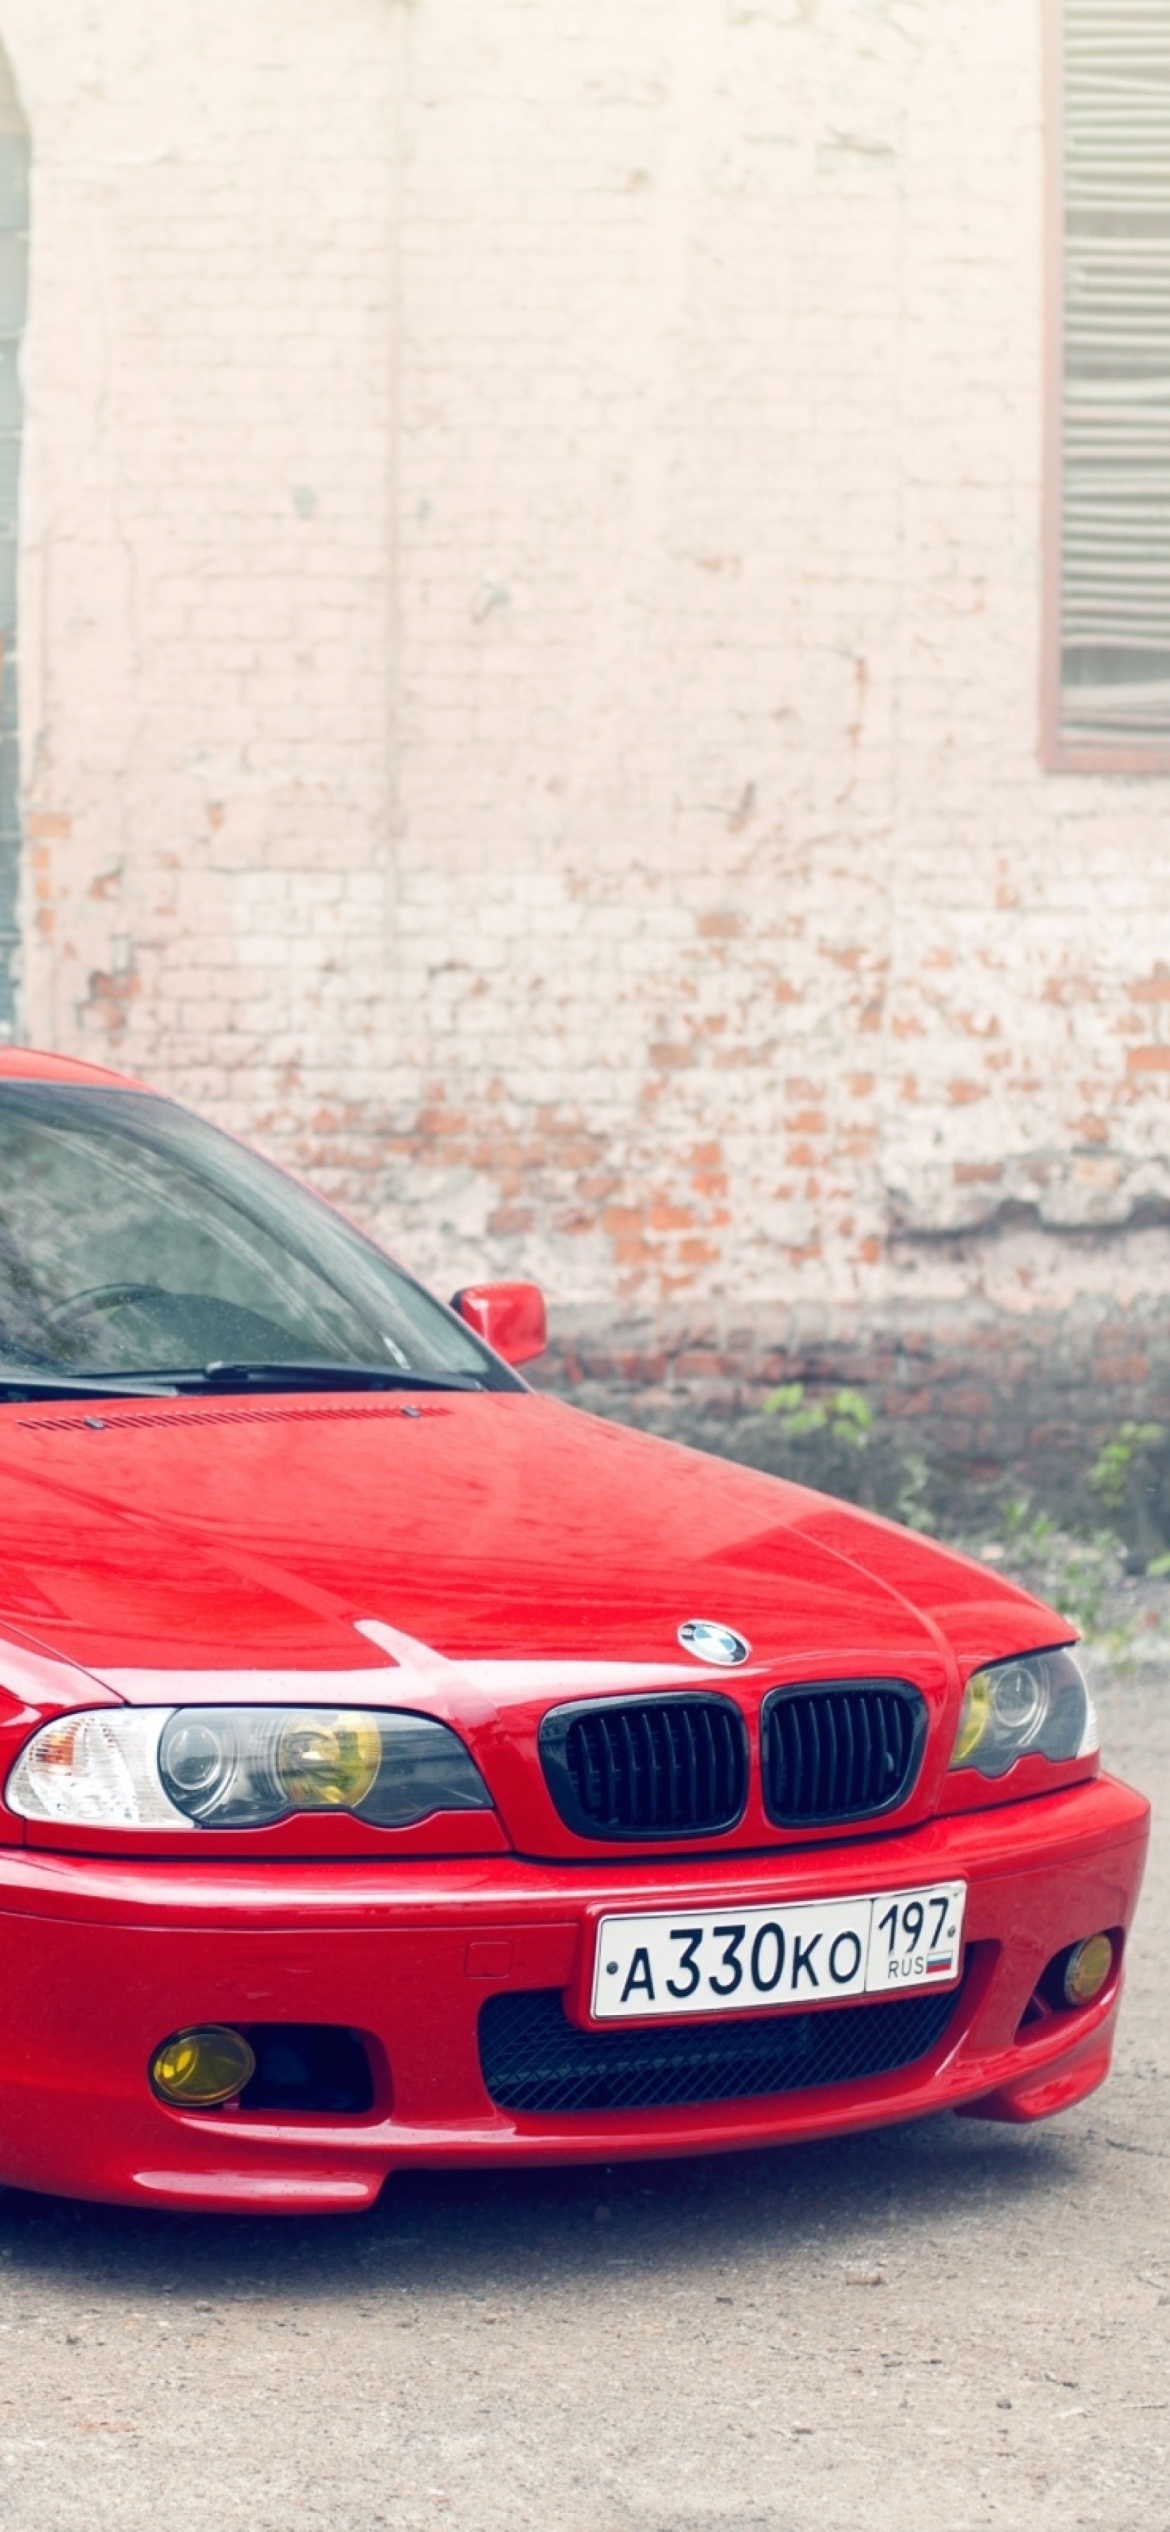 BMW E46 Stance Wallpaper for iPhone 11